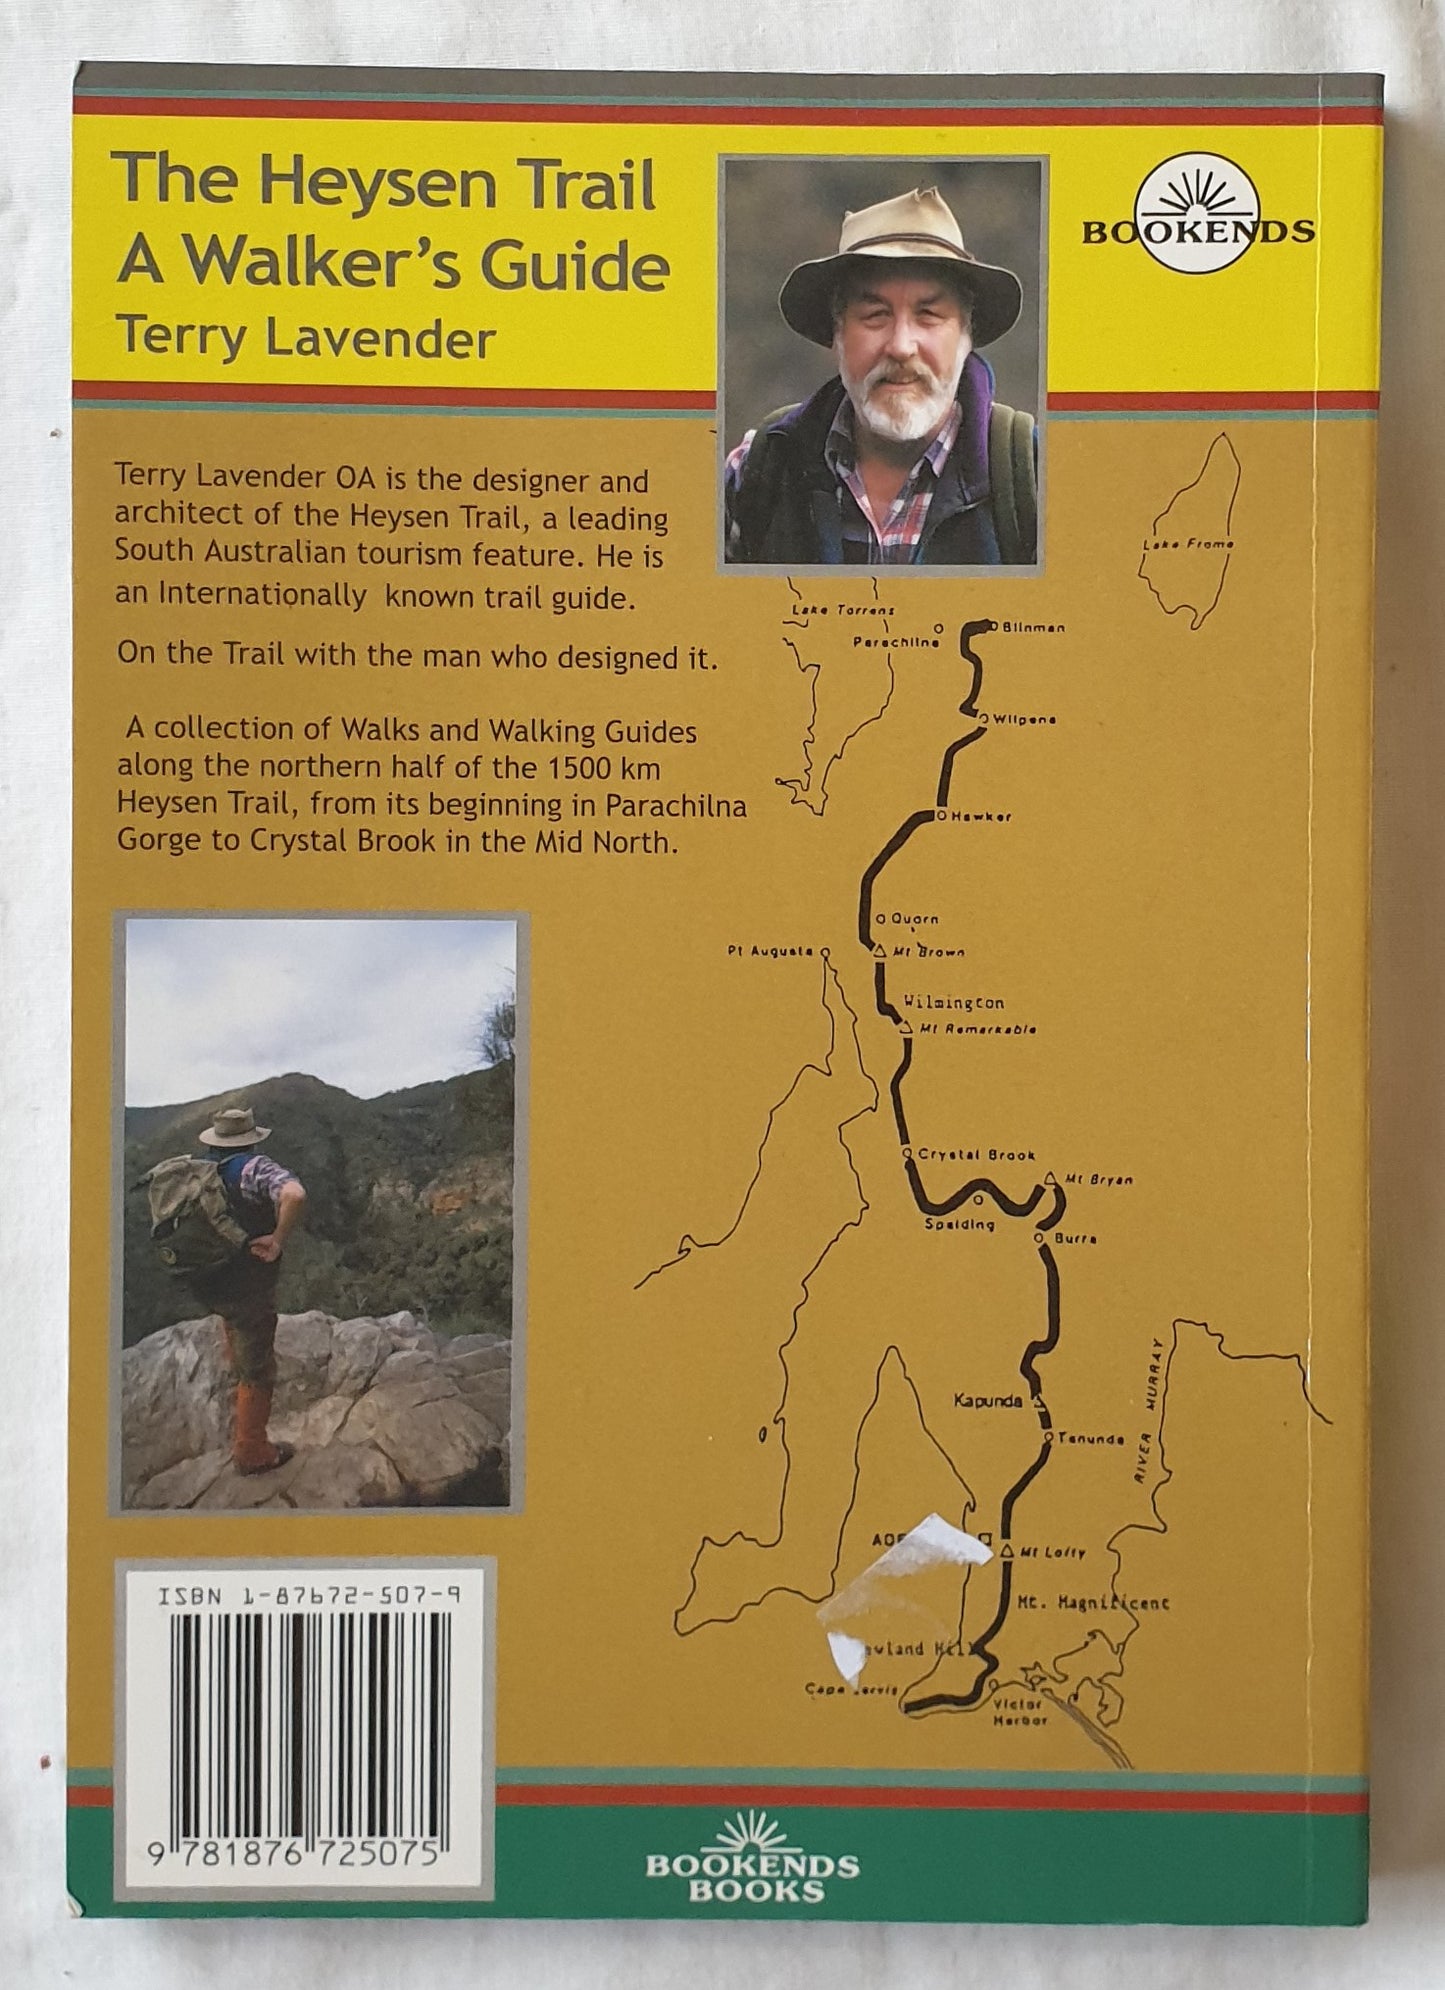 The Heysen Trail A Walker’s Guide by Terry Lavender